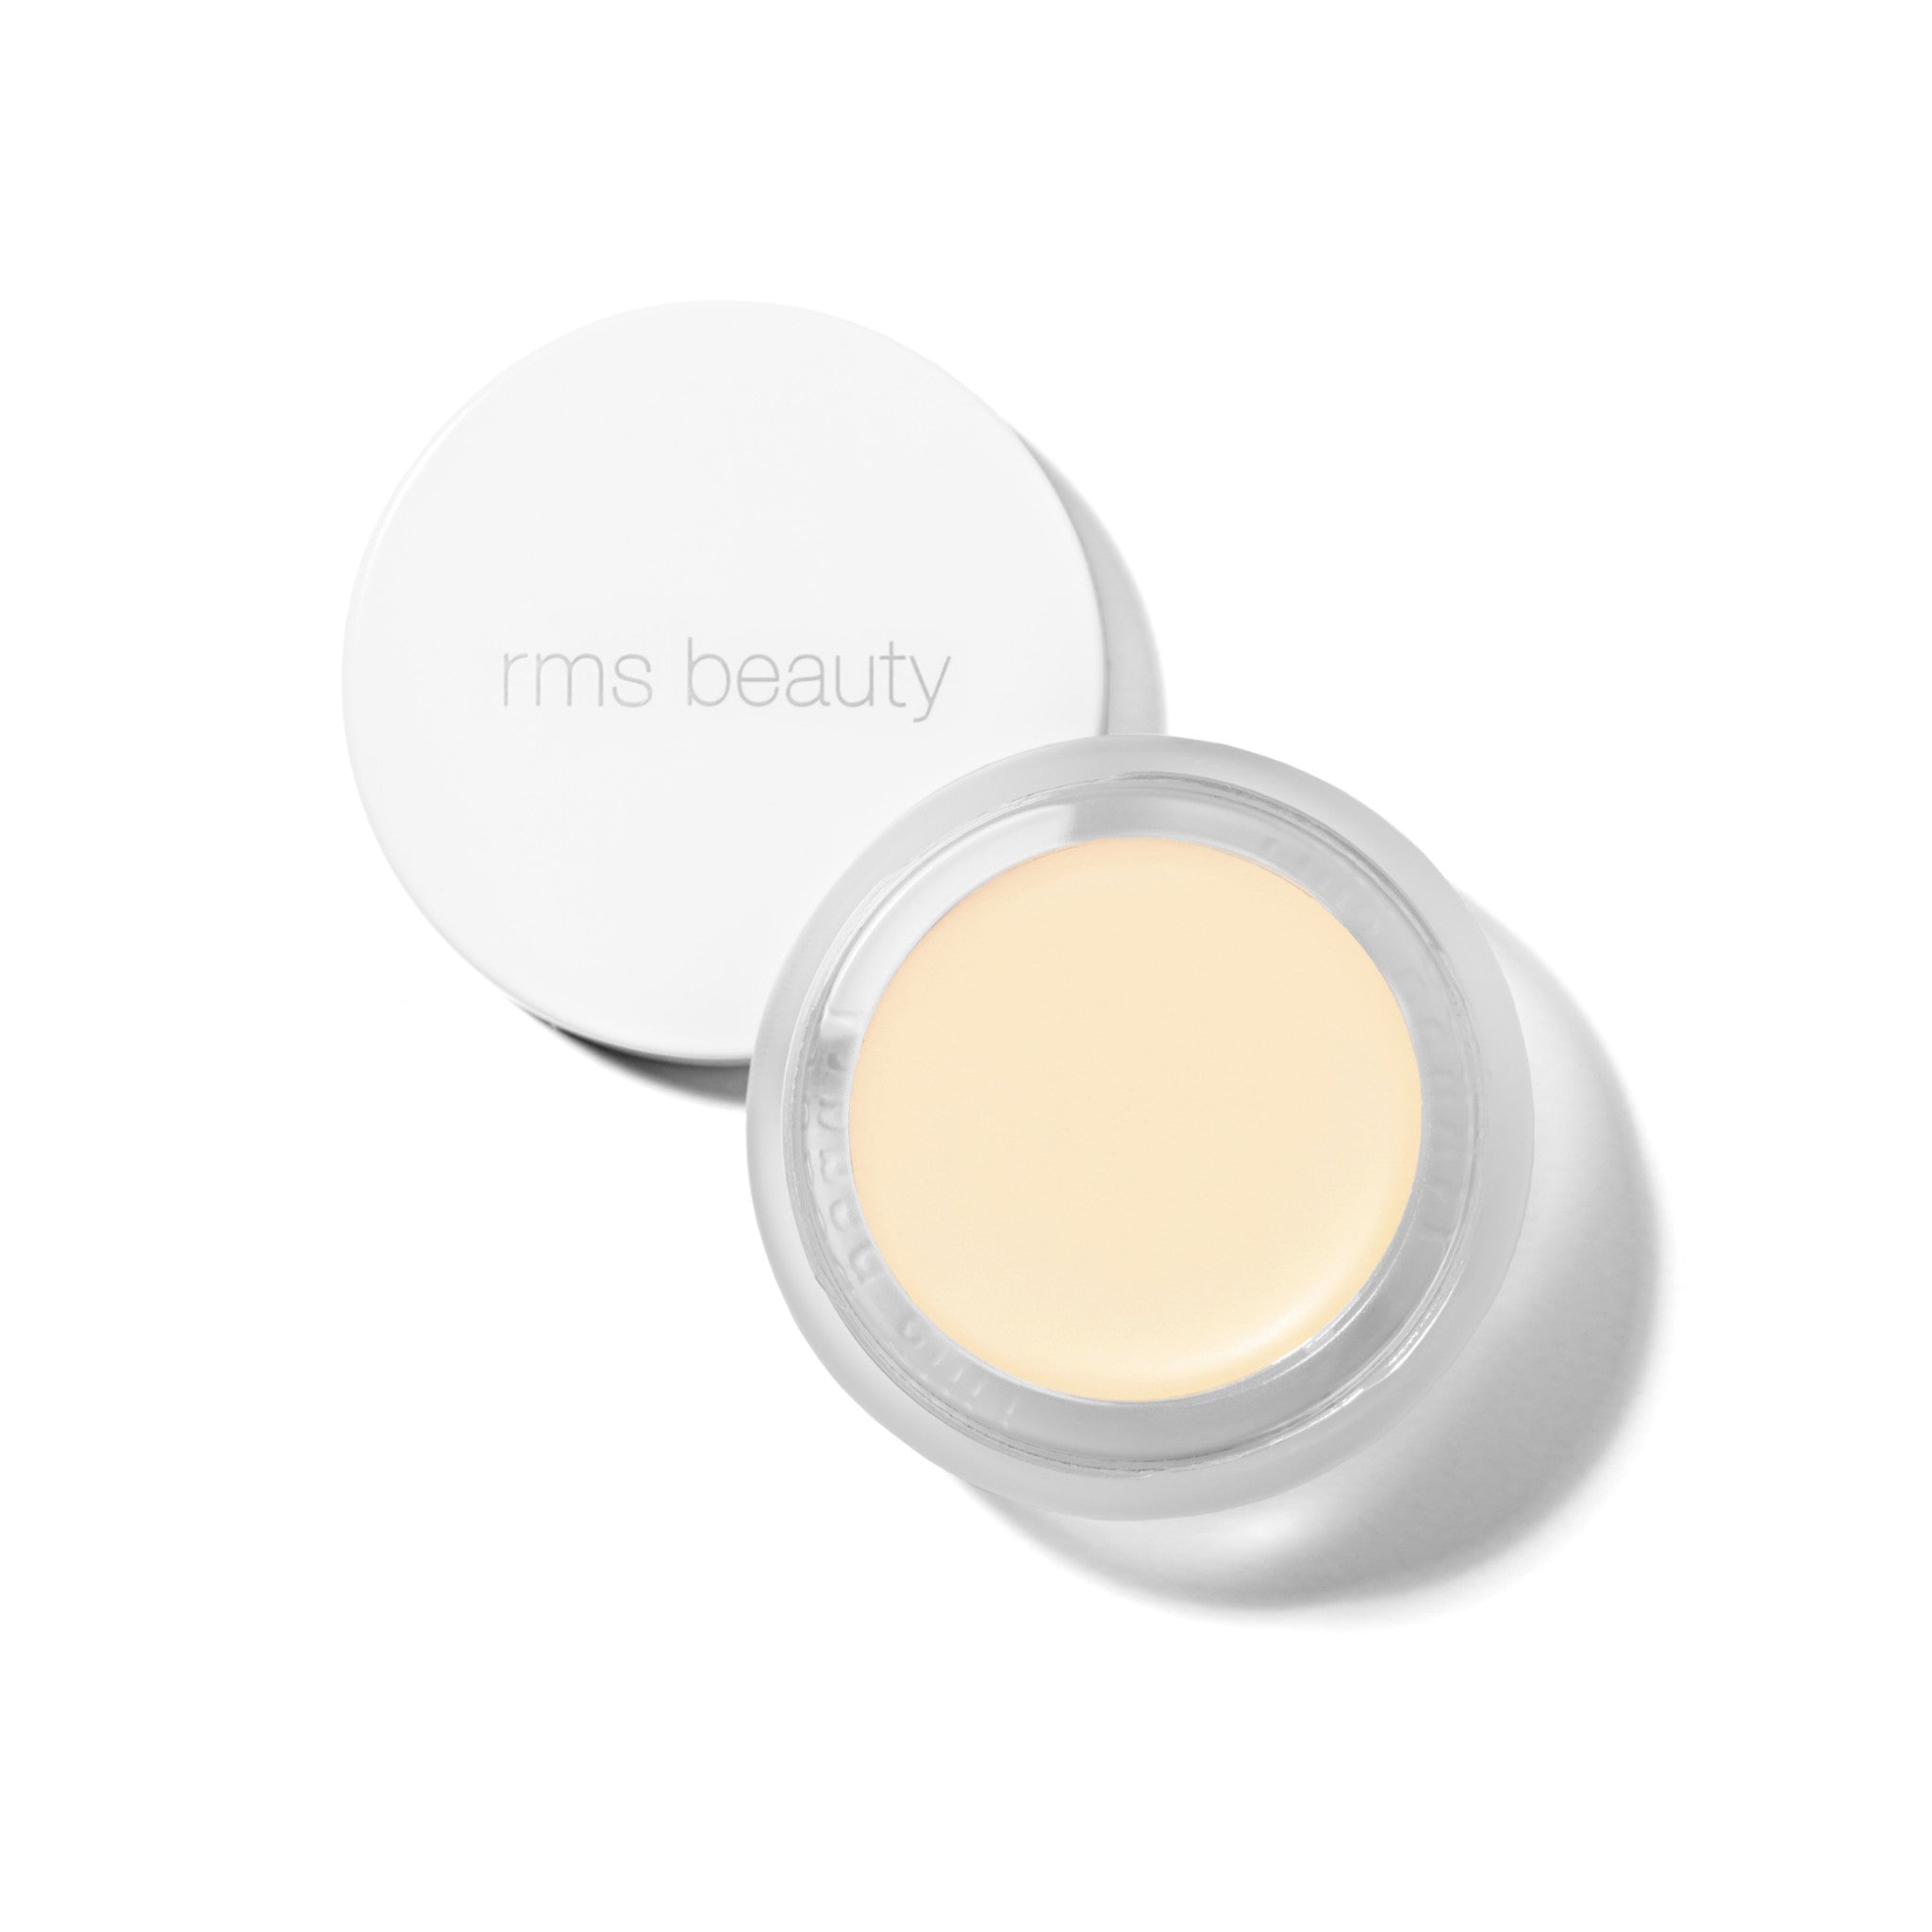 RMS Beauty UnCoverup Concealer Color/Shade variant: 000 main image. This product is for light neutral olive complexions